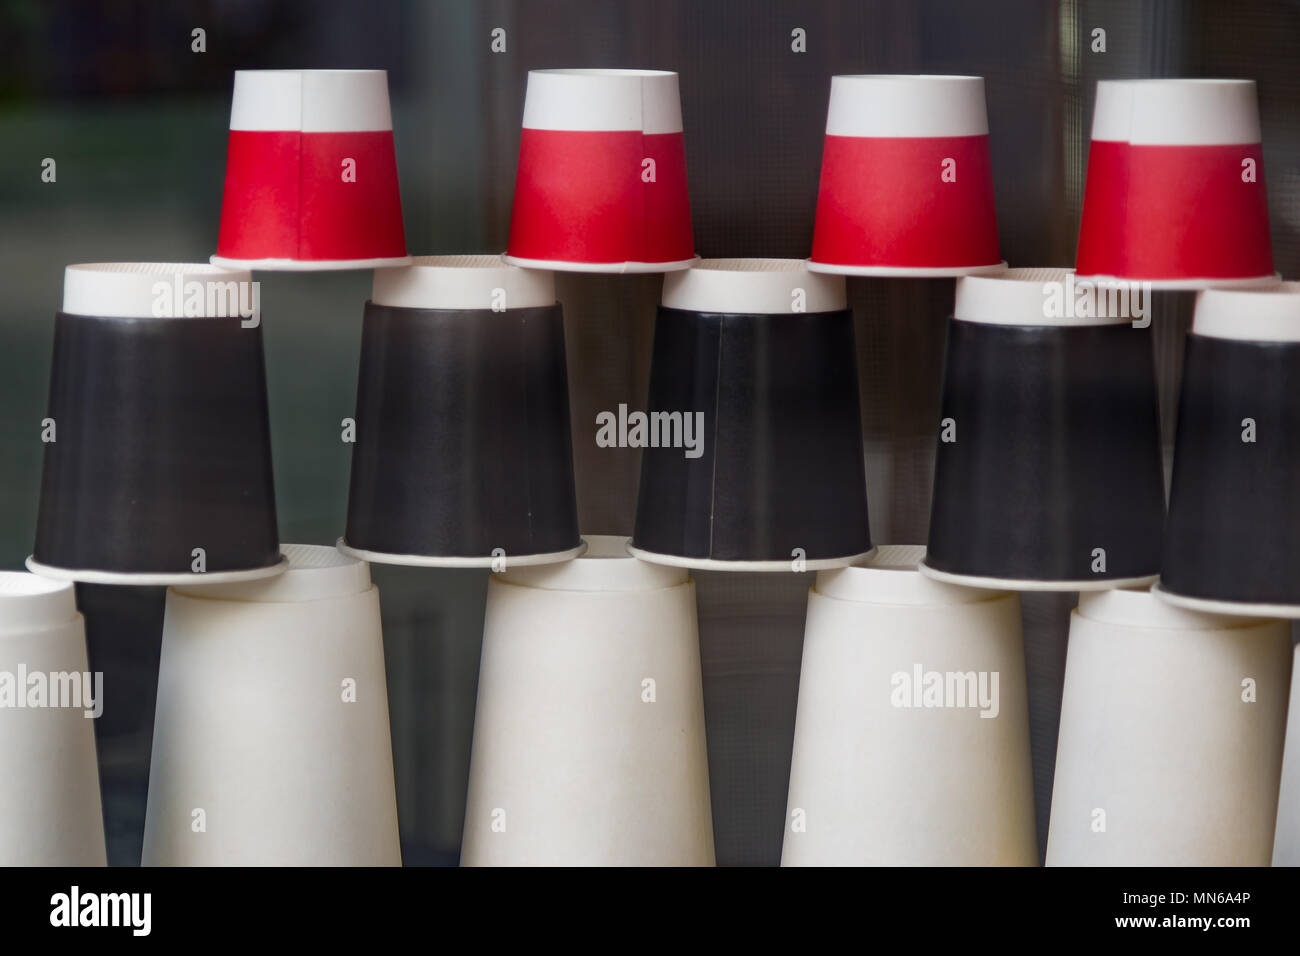 Disposable paper cups in the cafe showcase. Coffee to go. Red, black and white ecological cups of different sizes and shapes pyramid upside down behin Stock Photo